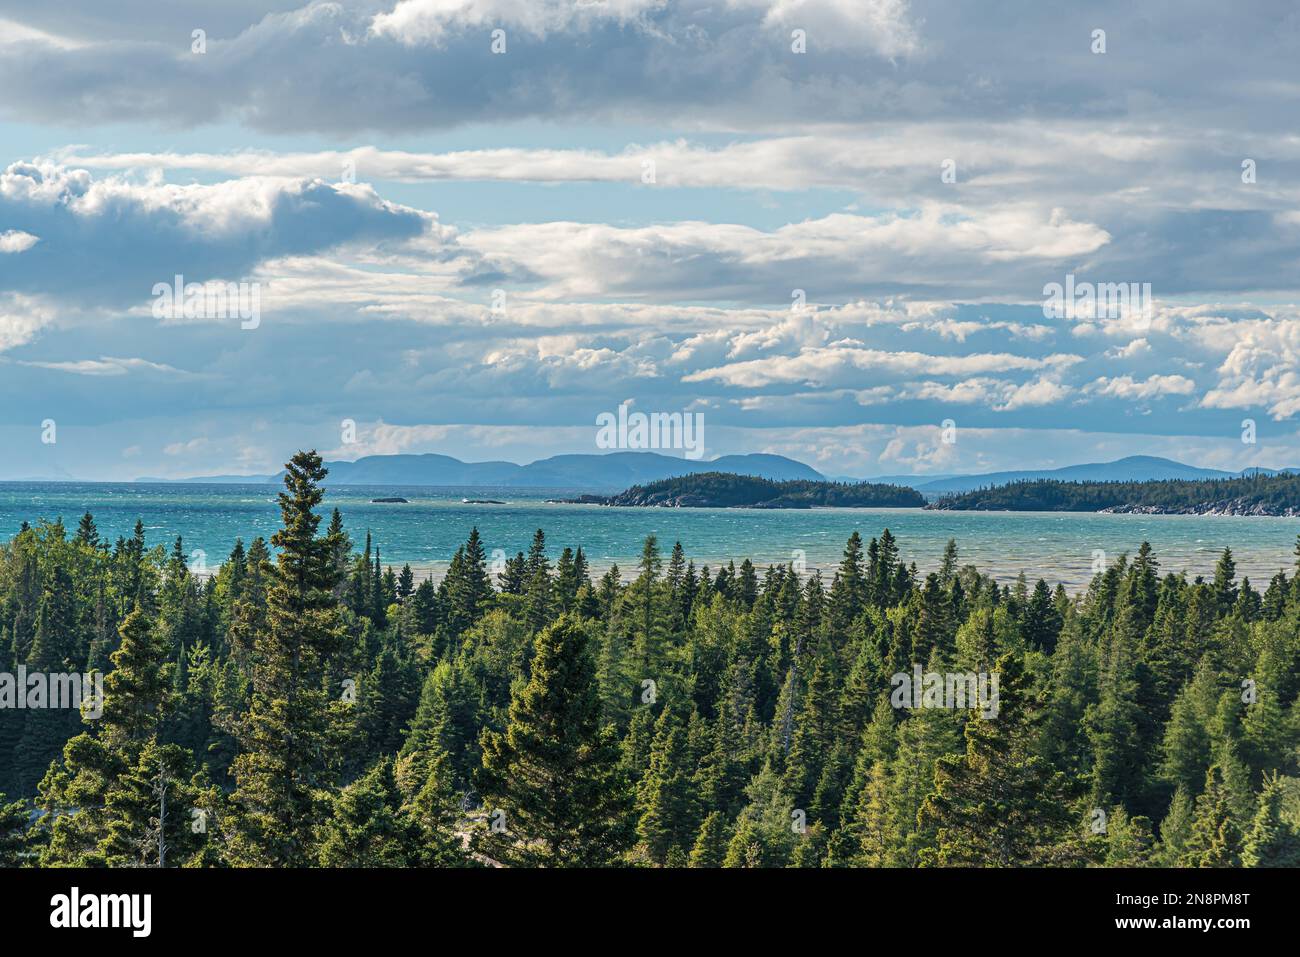 Landscape with forest in Ontario, Pukaskwa National Park. Canada. Stock Photo